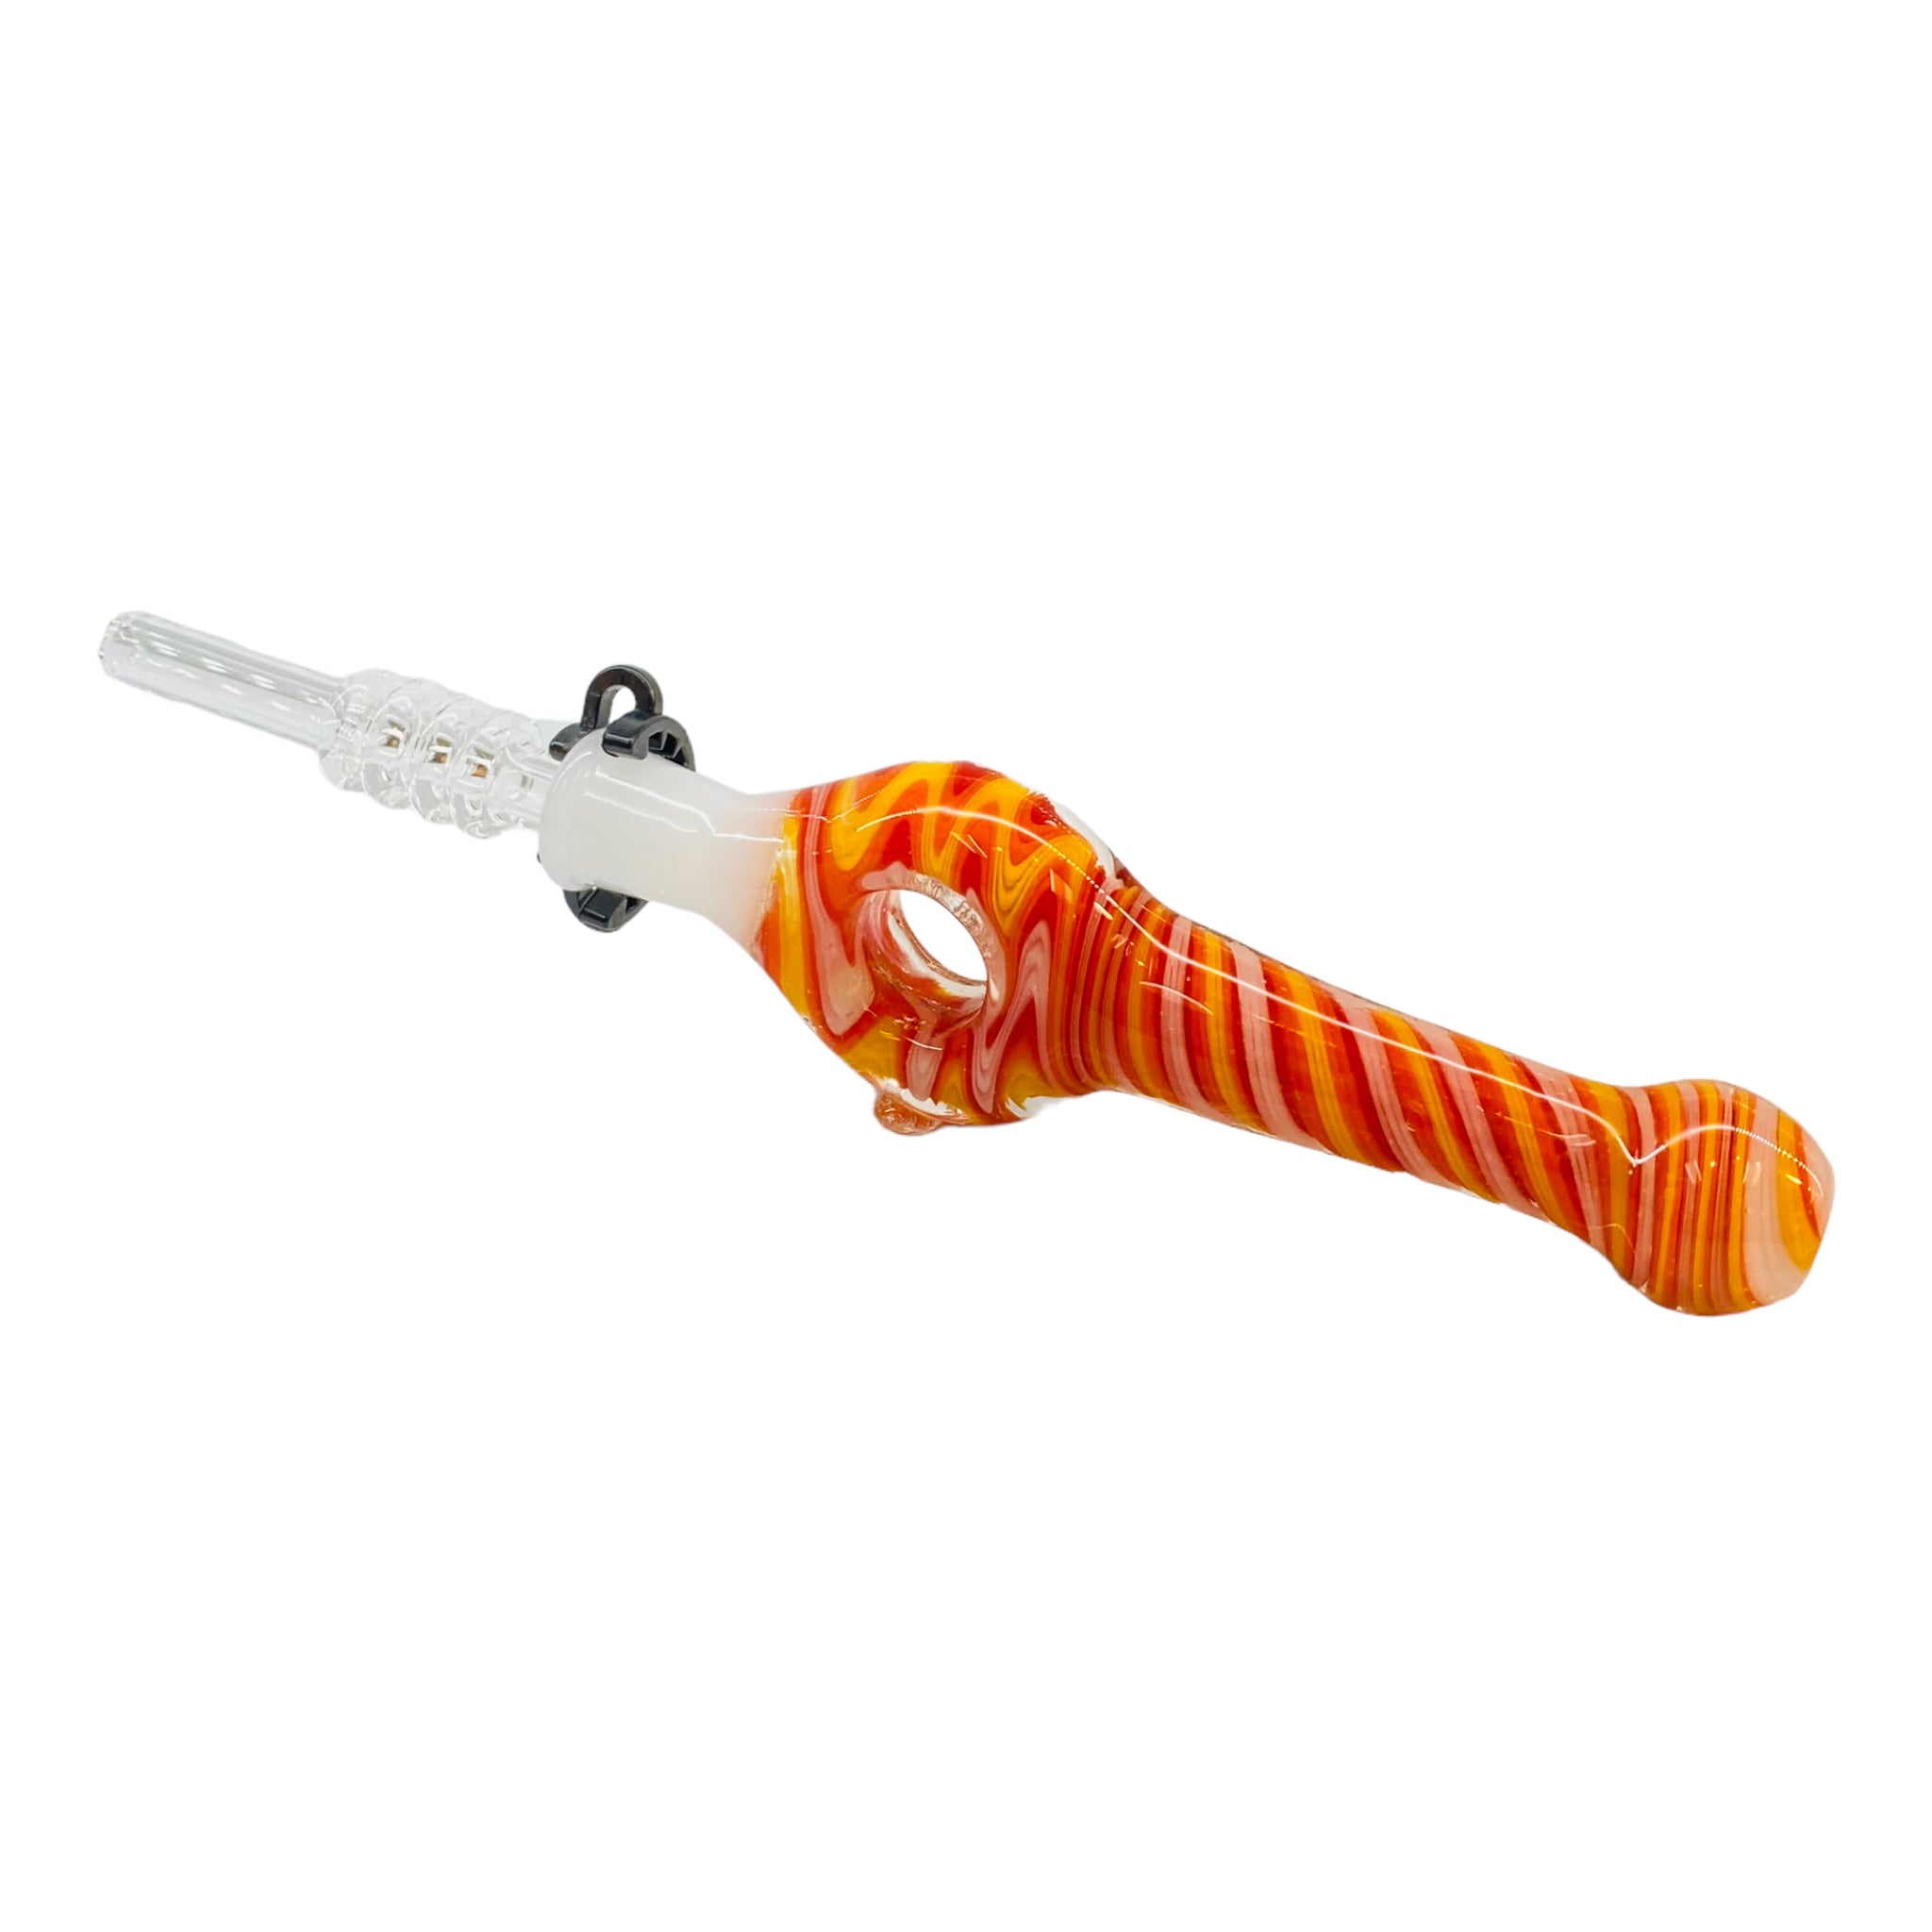 10mm Nectar Collector - Red, Orange And Yellow Wig Wag Spiral Donut With Quartz Tip